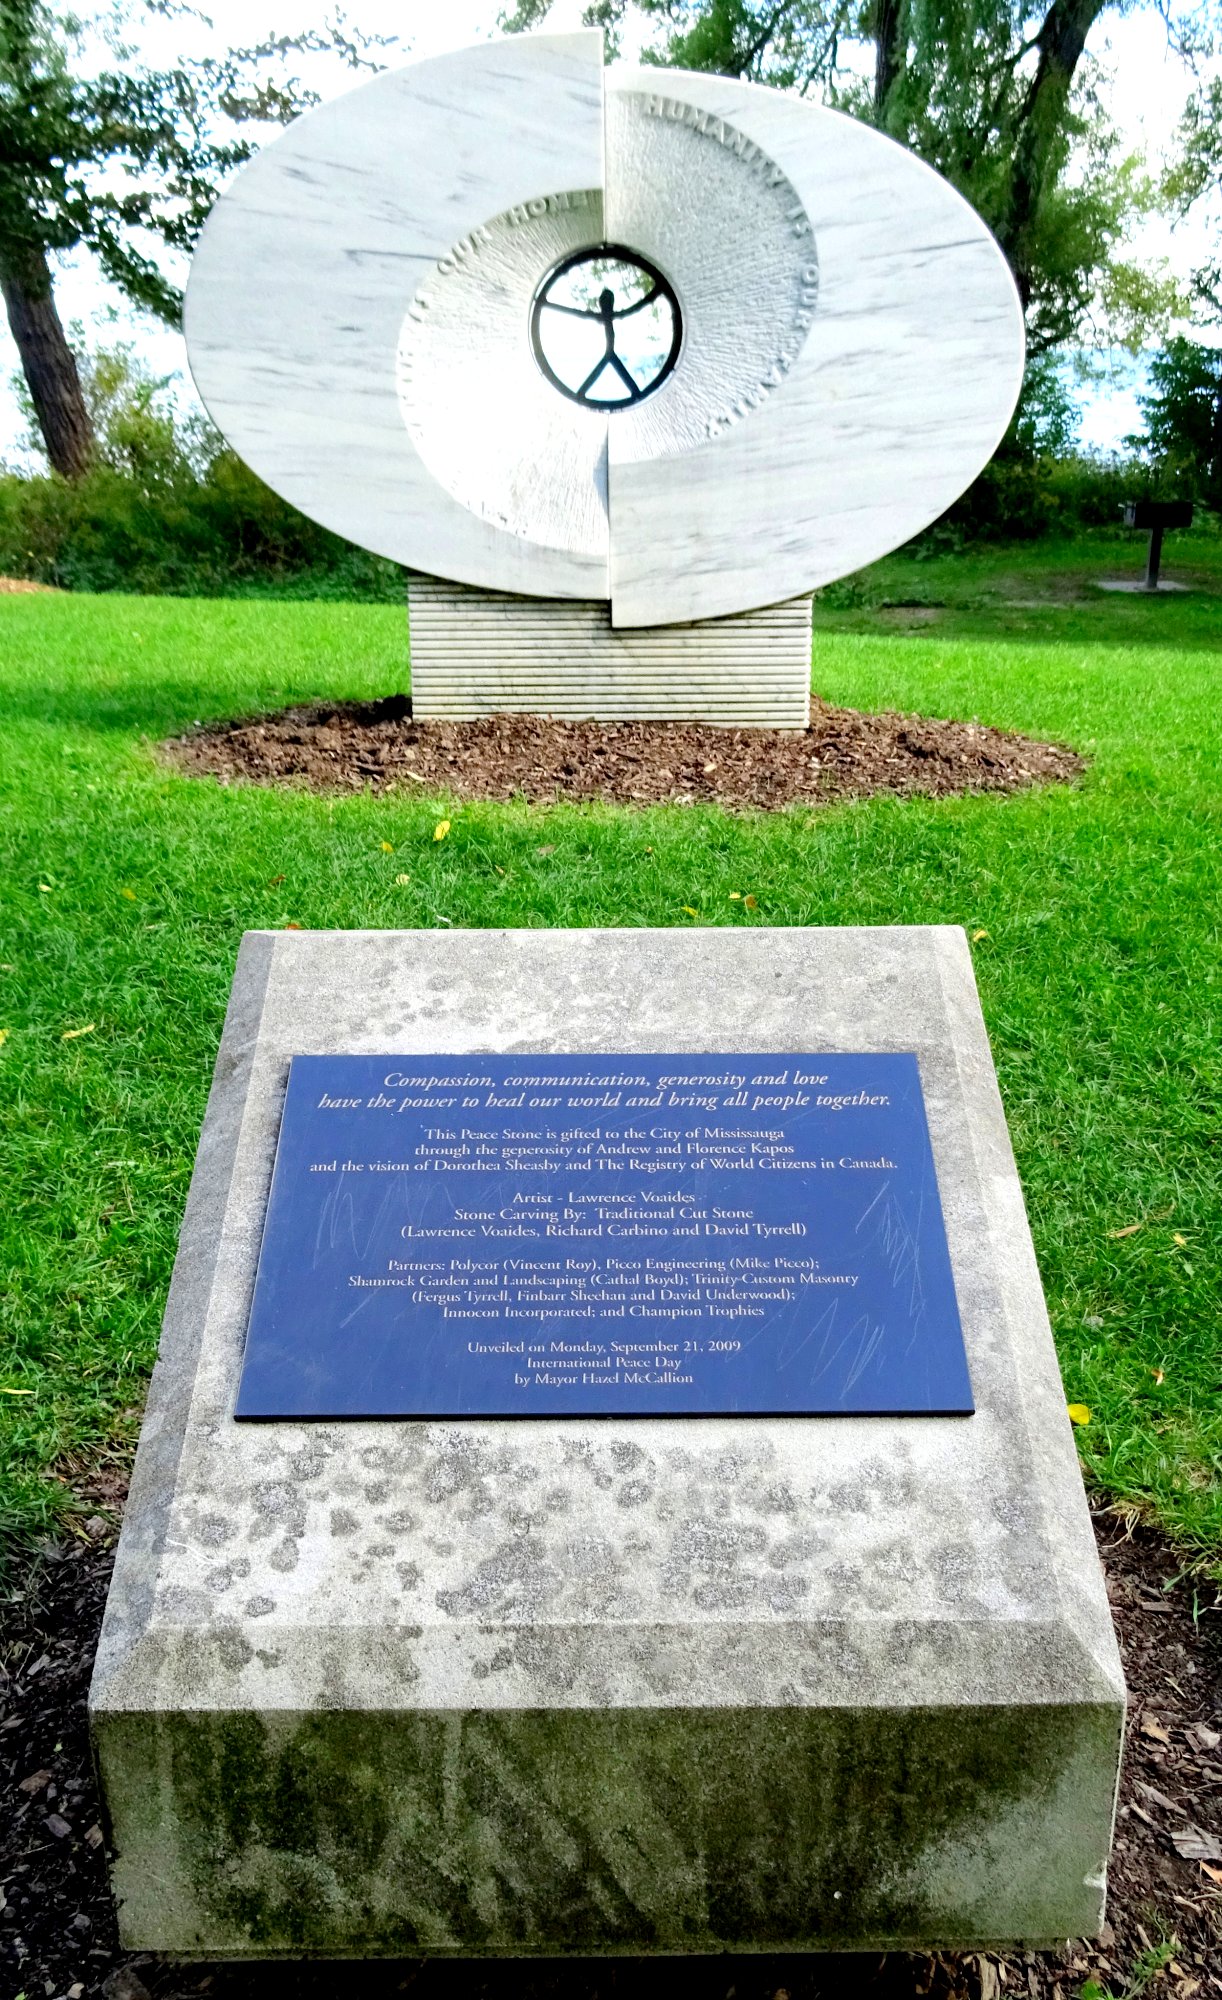 Peace Stone in Richard's Memorial Park, 804 Lakeshore Road West, Mississauga ON L5H 1E5 Canada - Photo by I Lee 27 Sep 2016